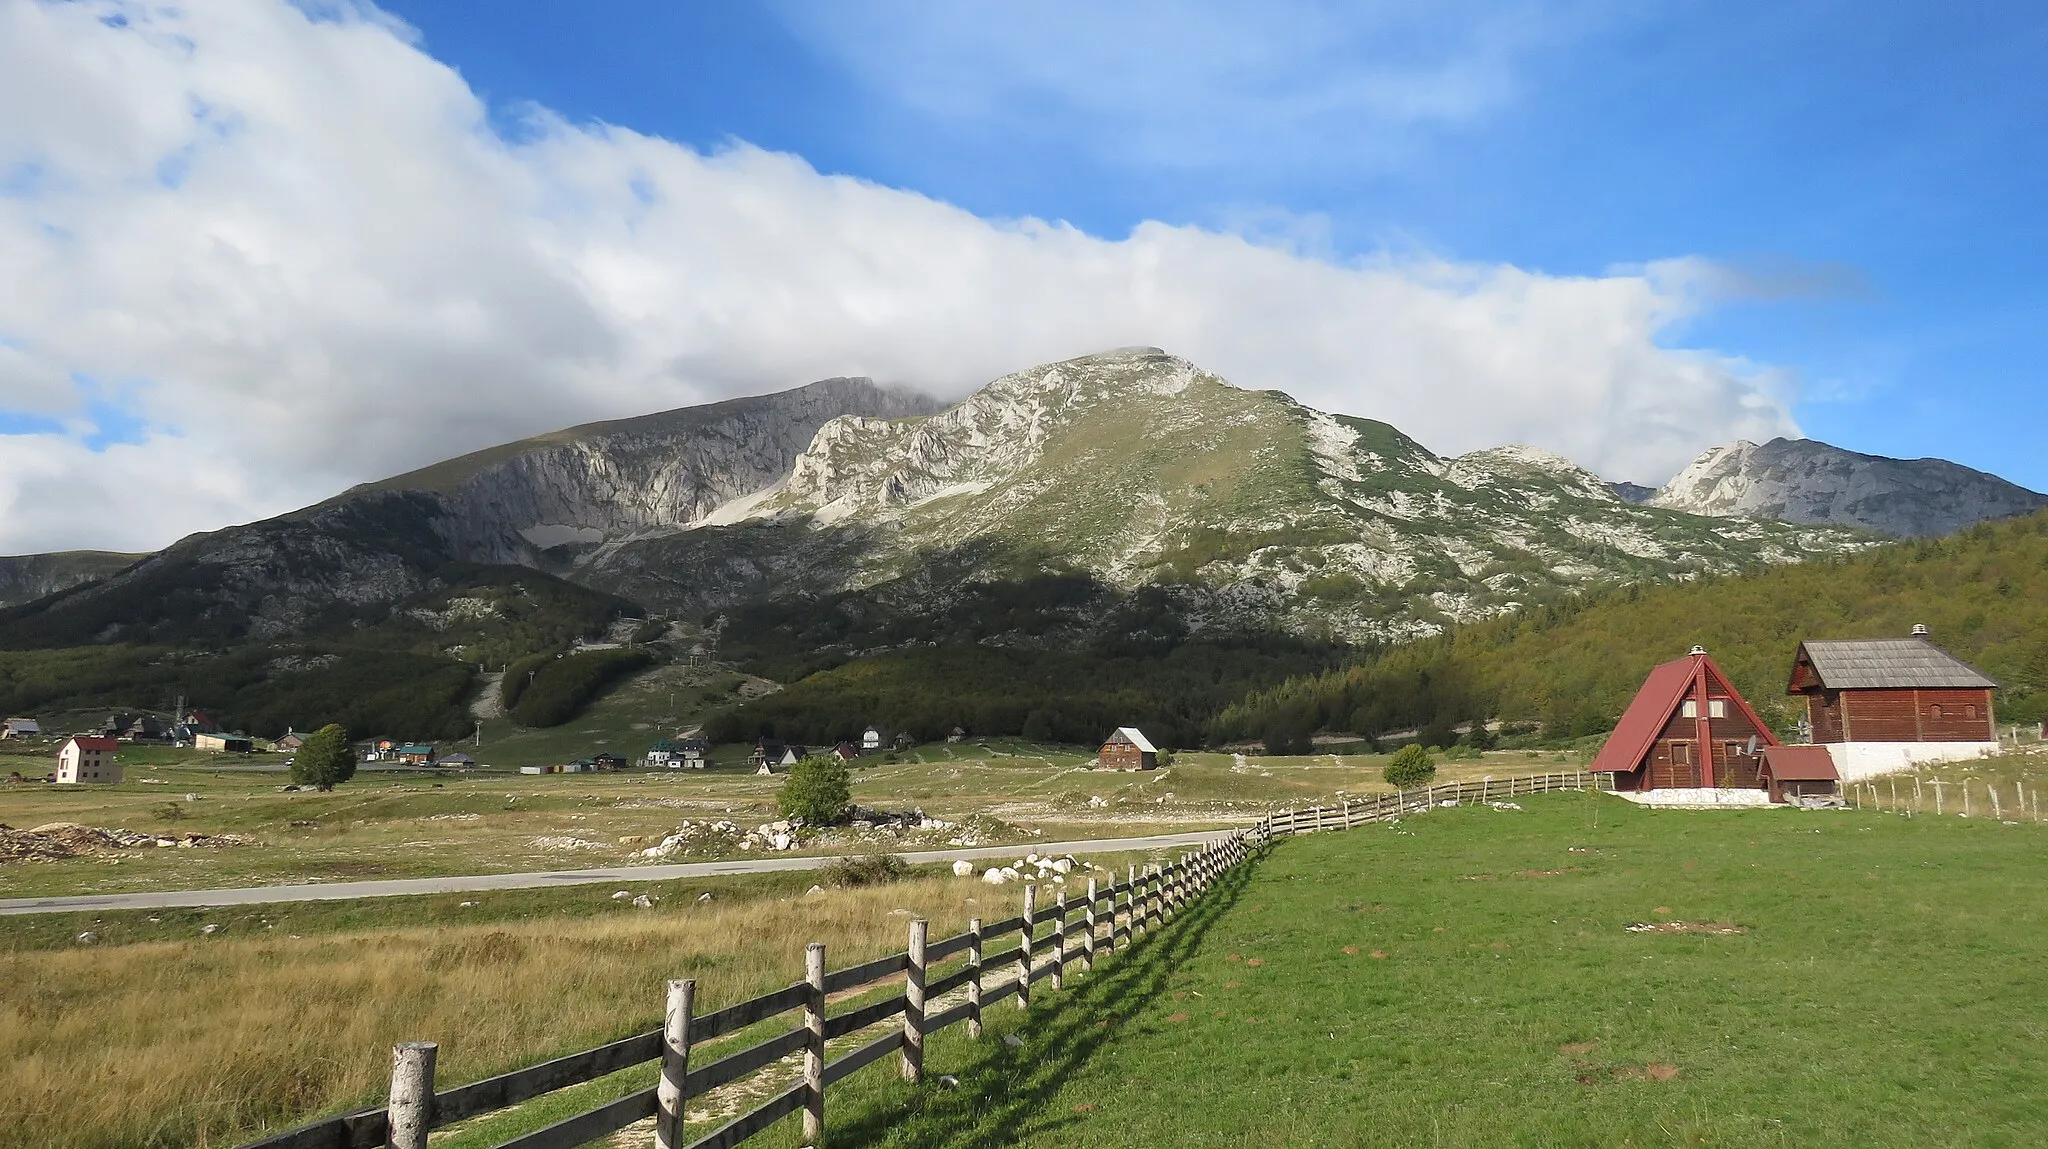 Photo showing: The mountain of Savin Kuk with the village of Motički Gaj in the foreground, Montenegro.